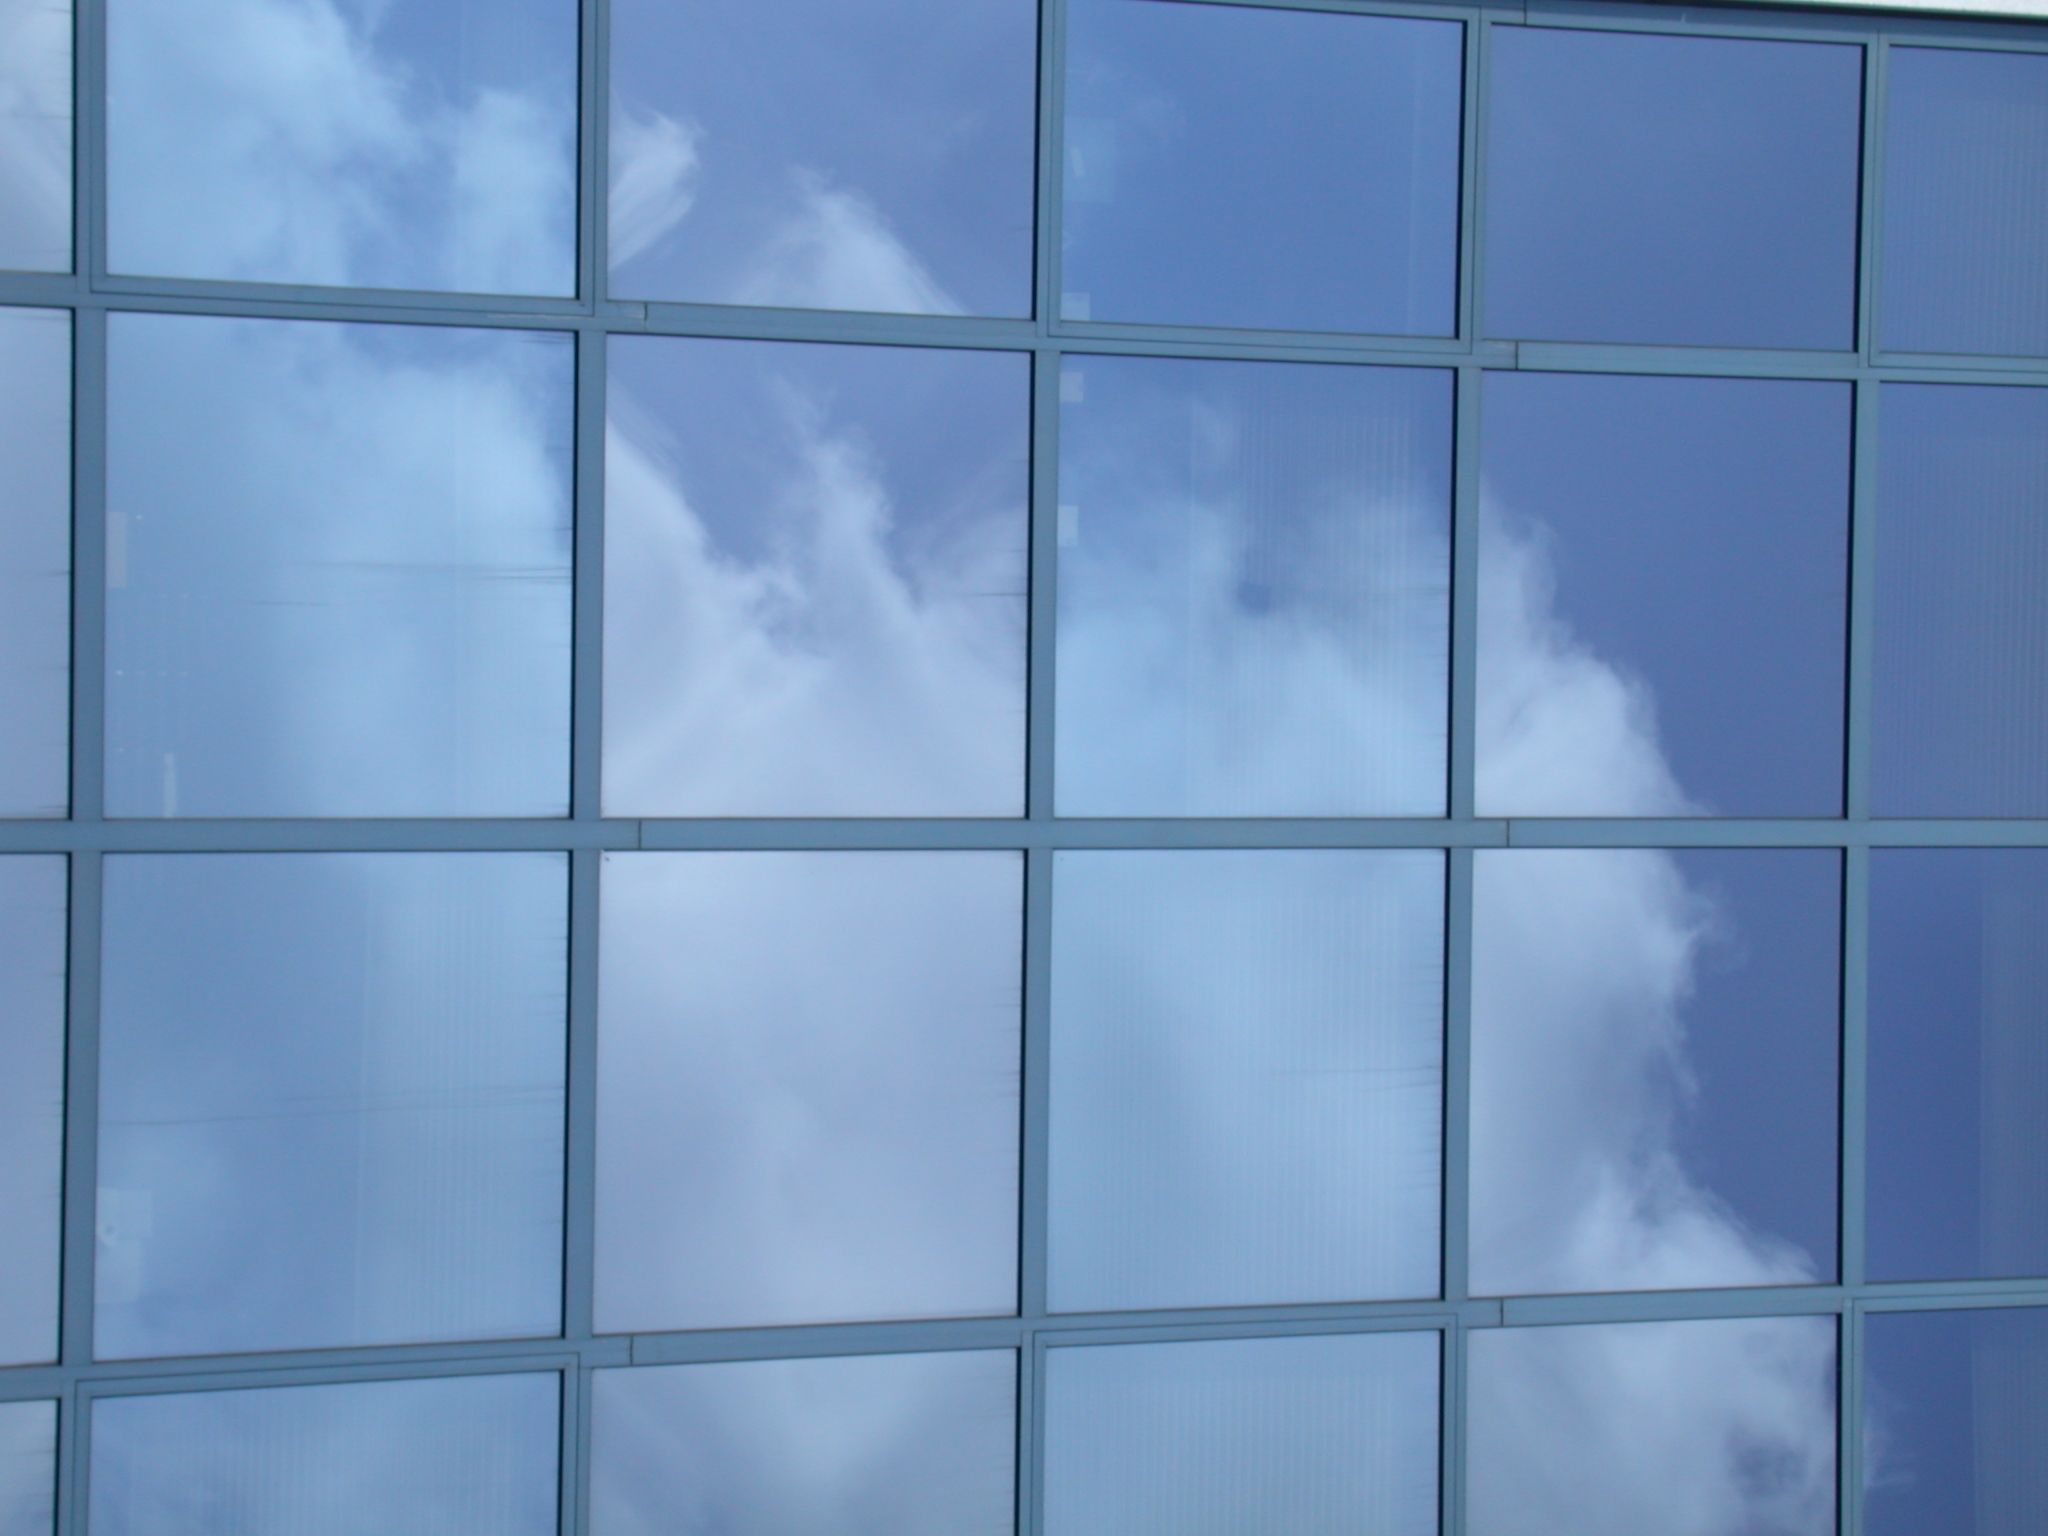 glass windows building clouds sky | Textures and Images | Pinterest